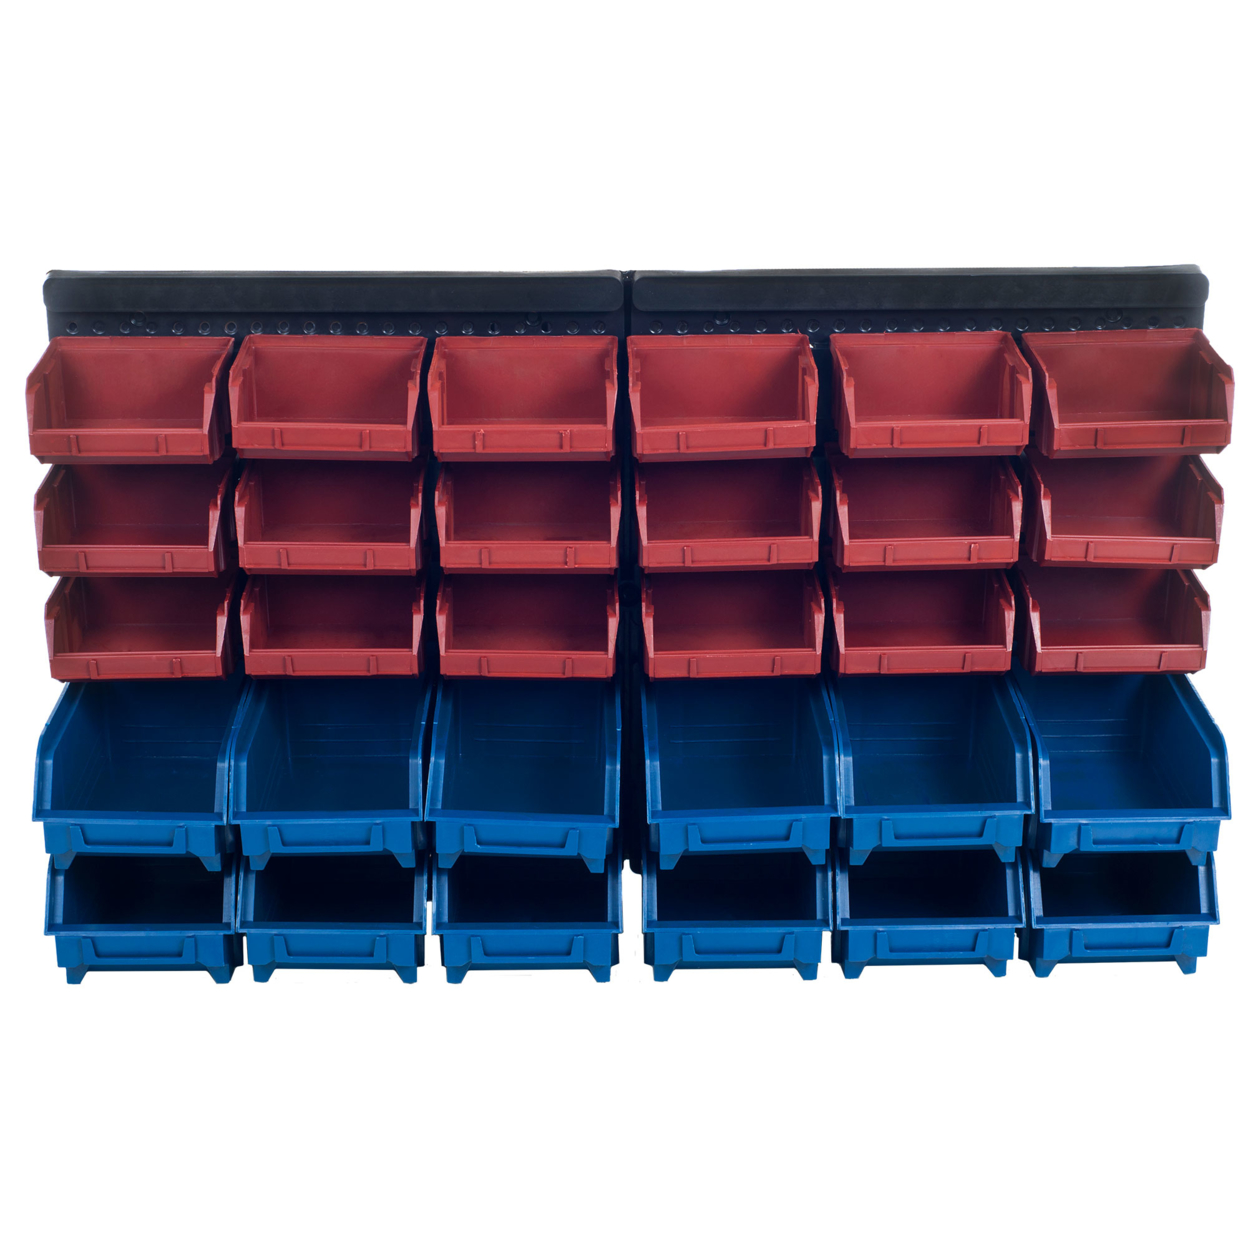 Storage Drawers-30 Compartment Wall Mount Organizer Bins- Easy Access Crafts